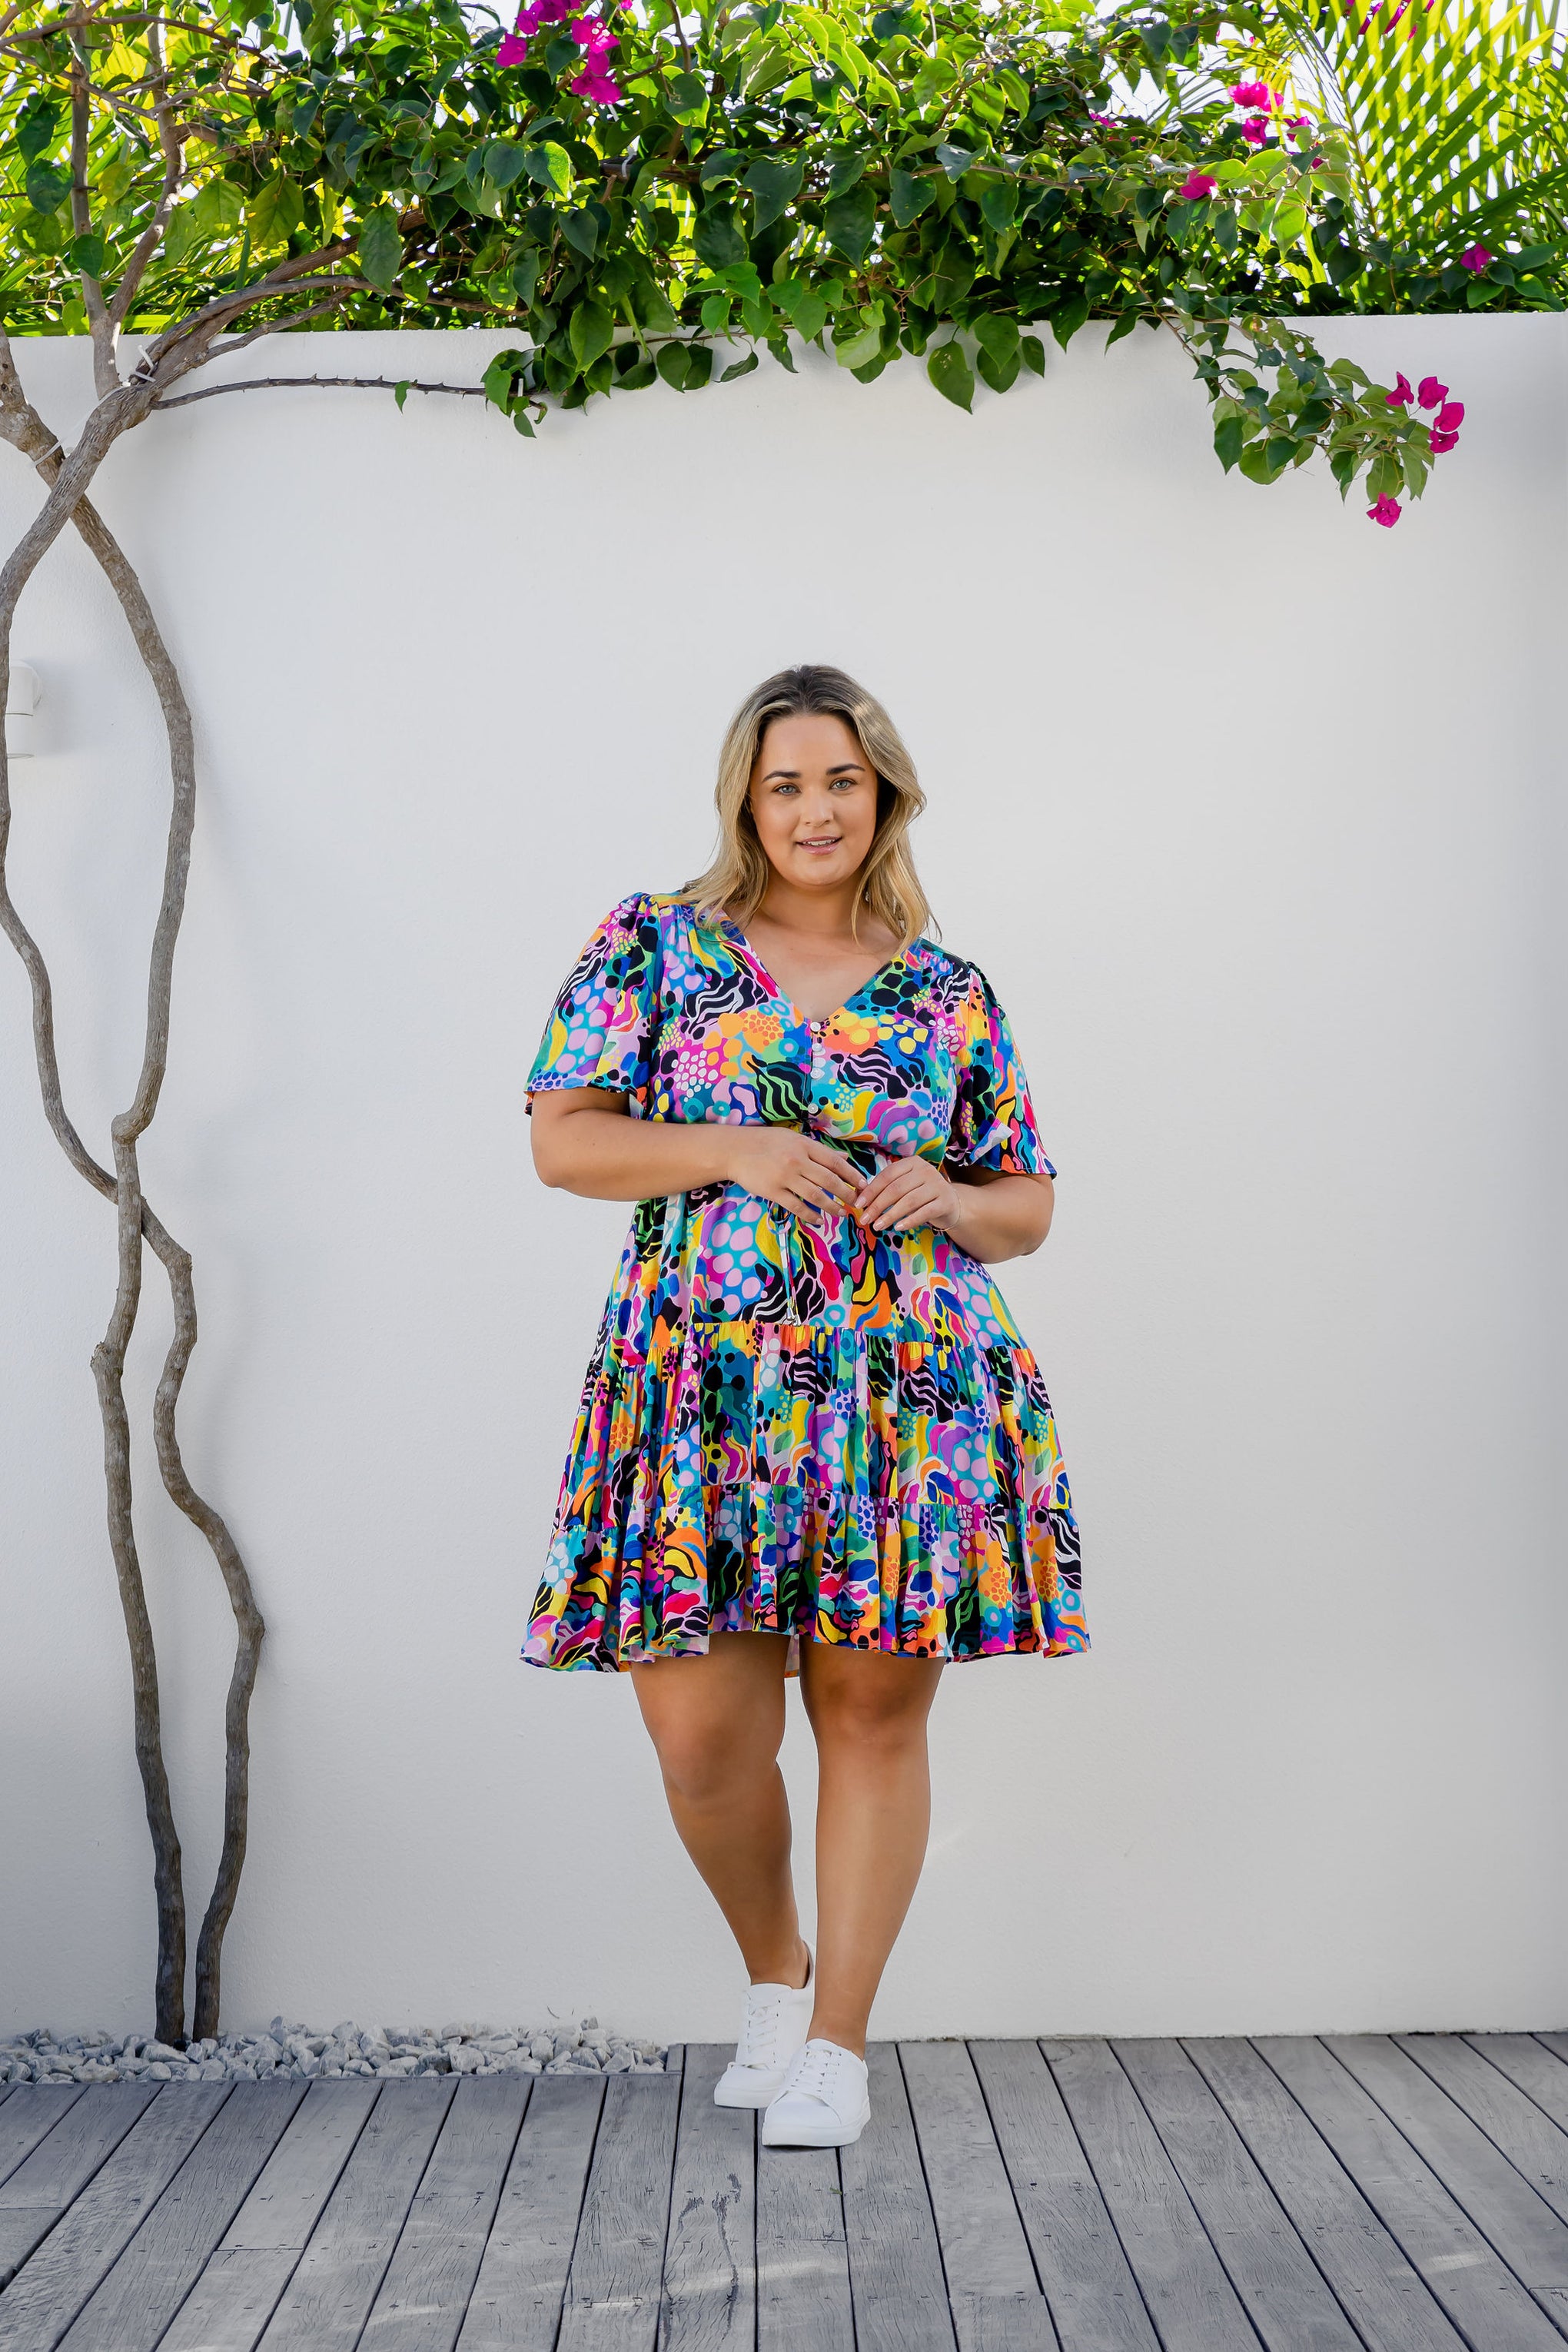 Charlie Dress in Electric Zee by Kasey Rainbow